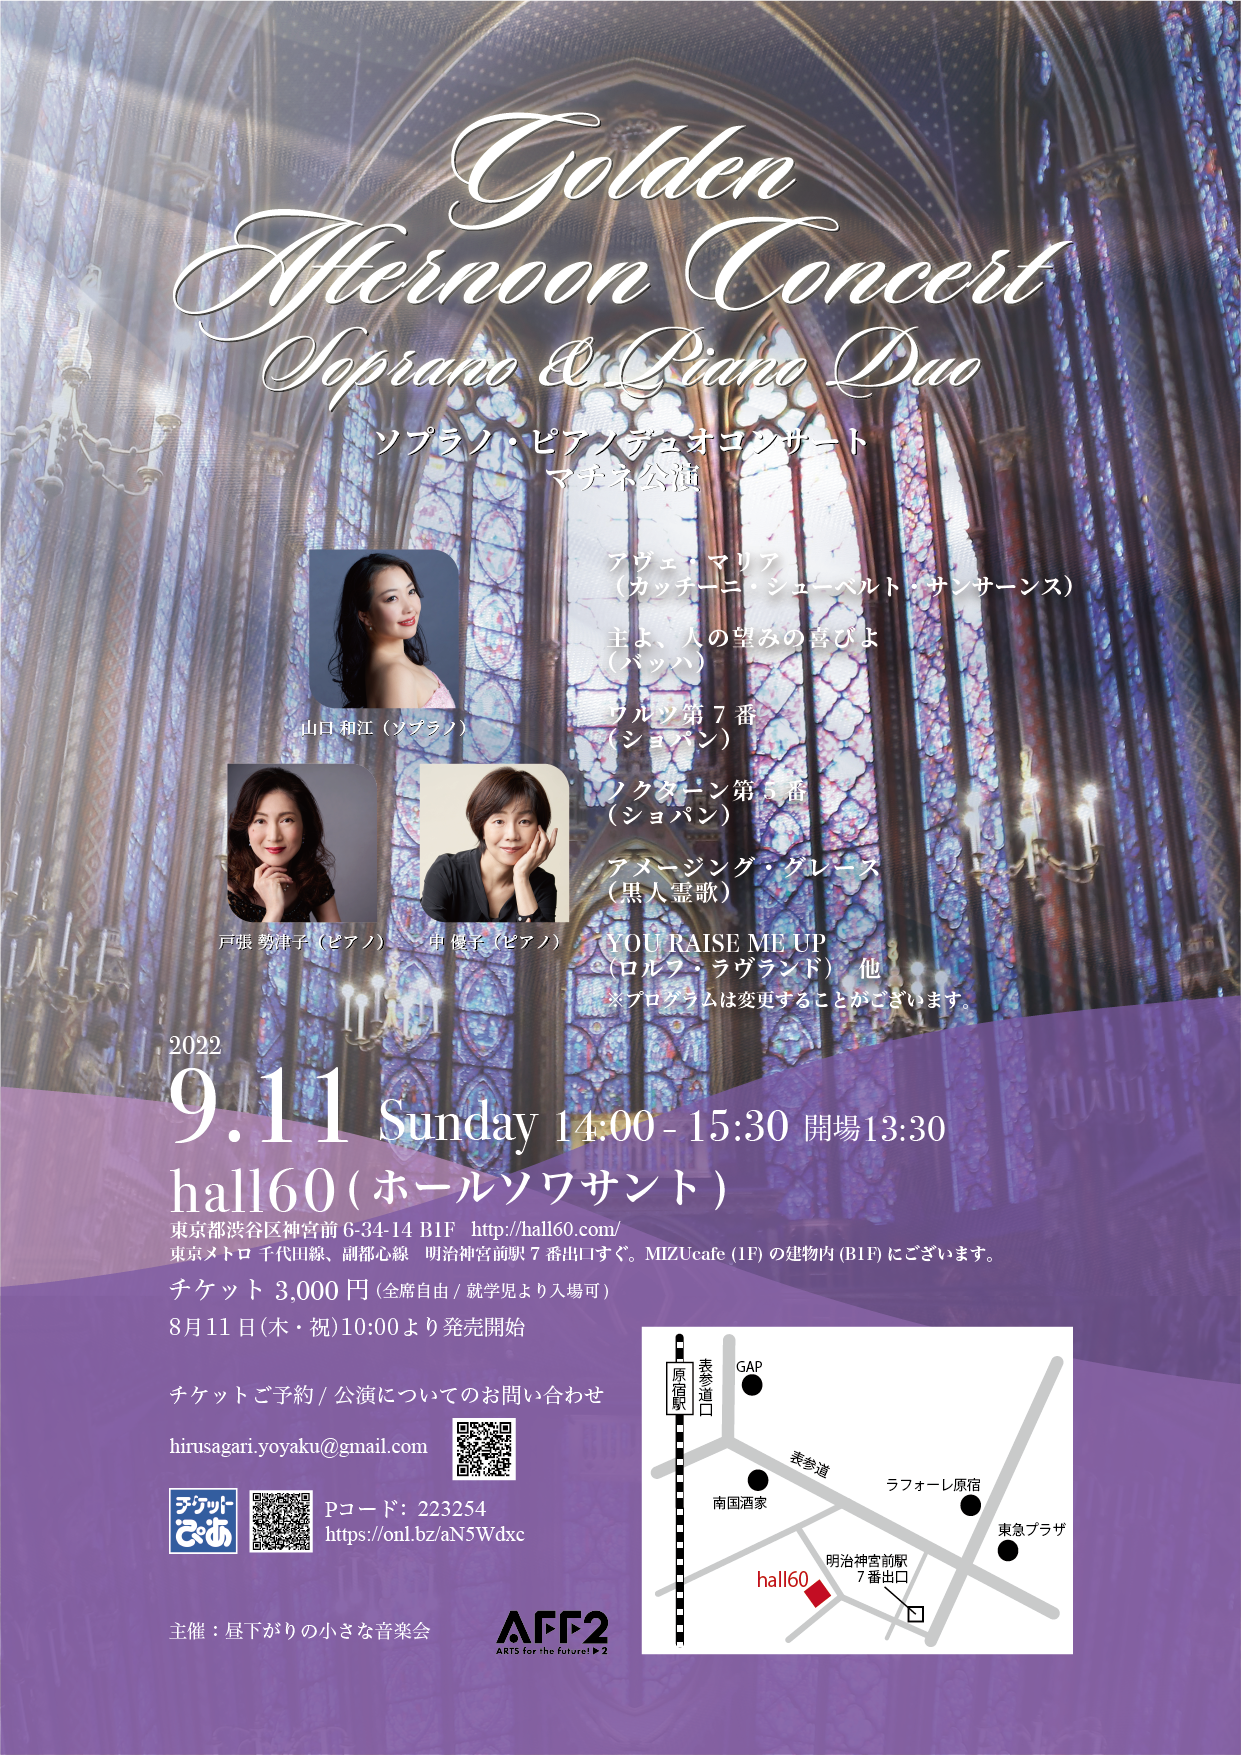 Golden Afternoon Concert　Soprano & Piano Duo